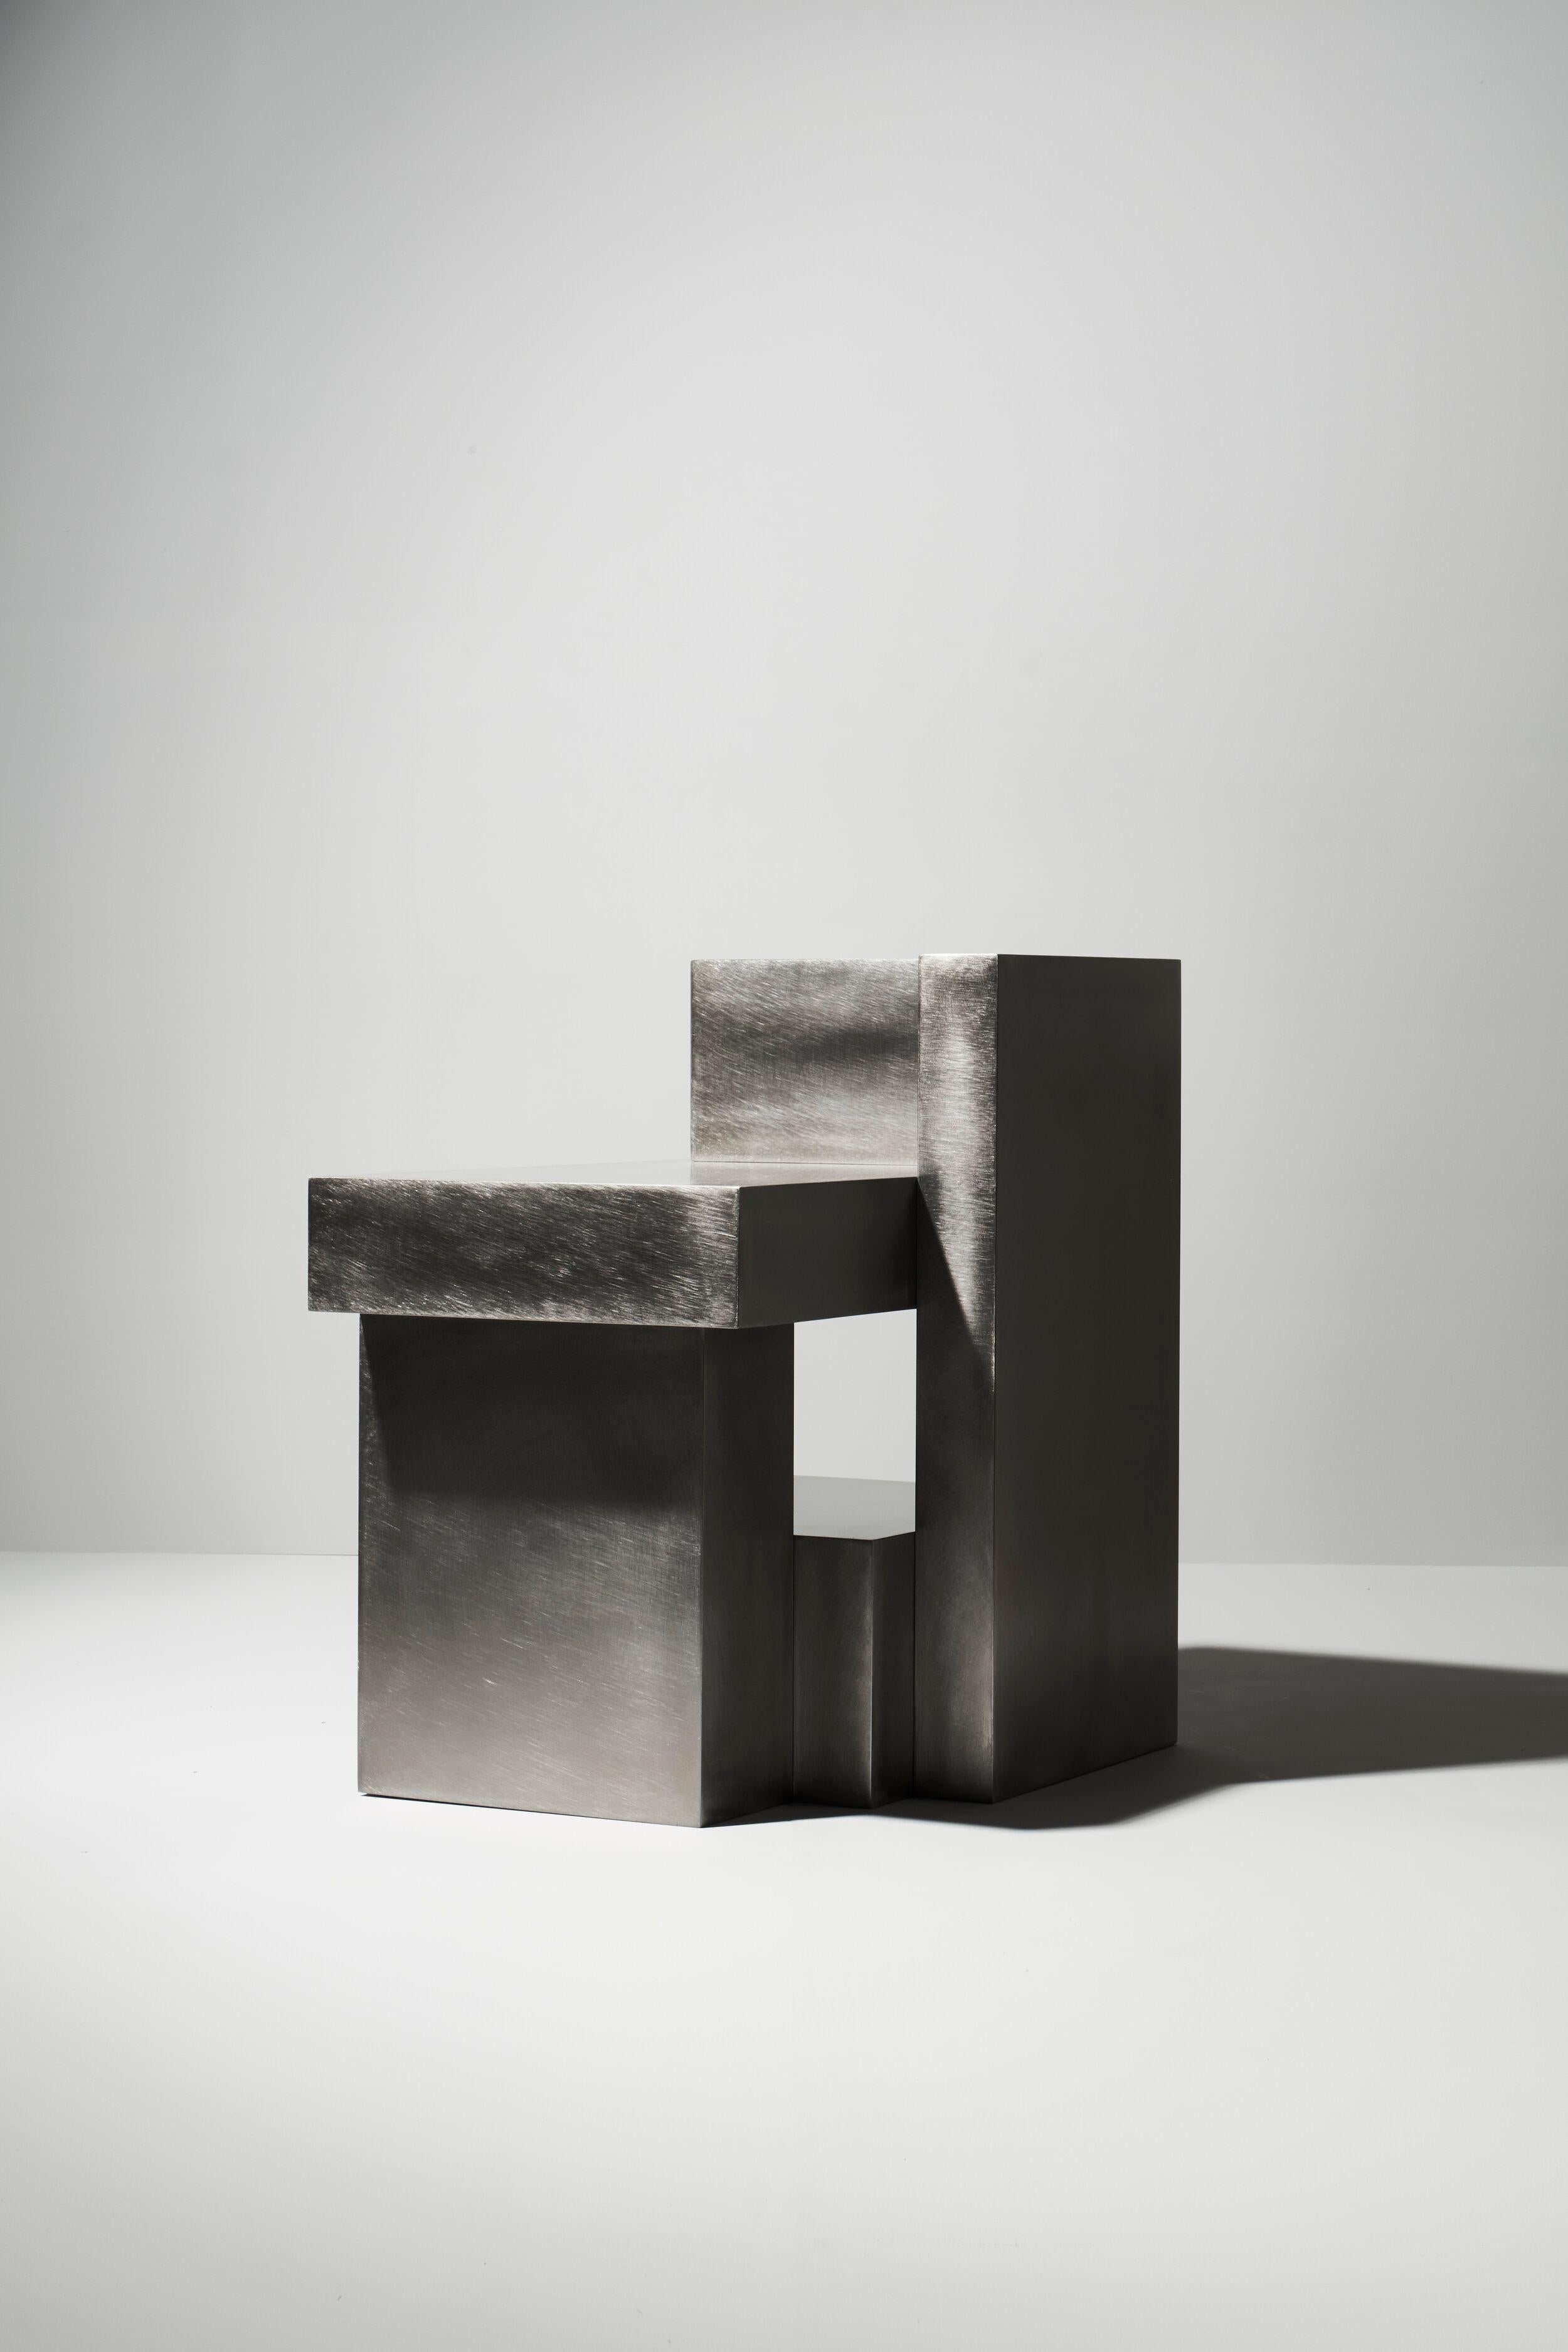 Layered steel seat VII by Hyungshin Hwang
Dimensions: D 33 x W 54 x H 66 cm
Materials: stainless steel

Layered Series is the main theme and concept of work of Hwang, who continues his experiment which is based on architectural composition of